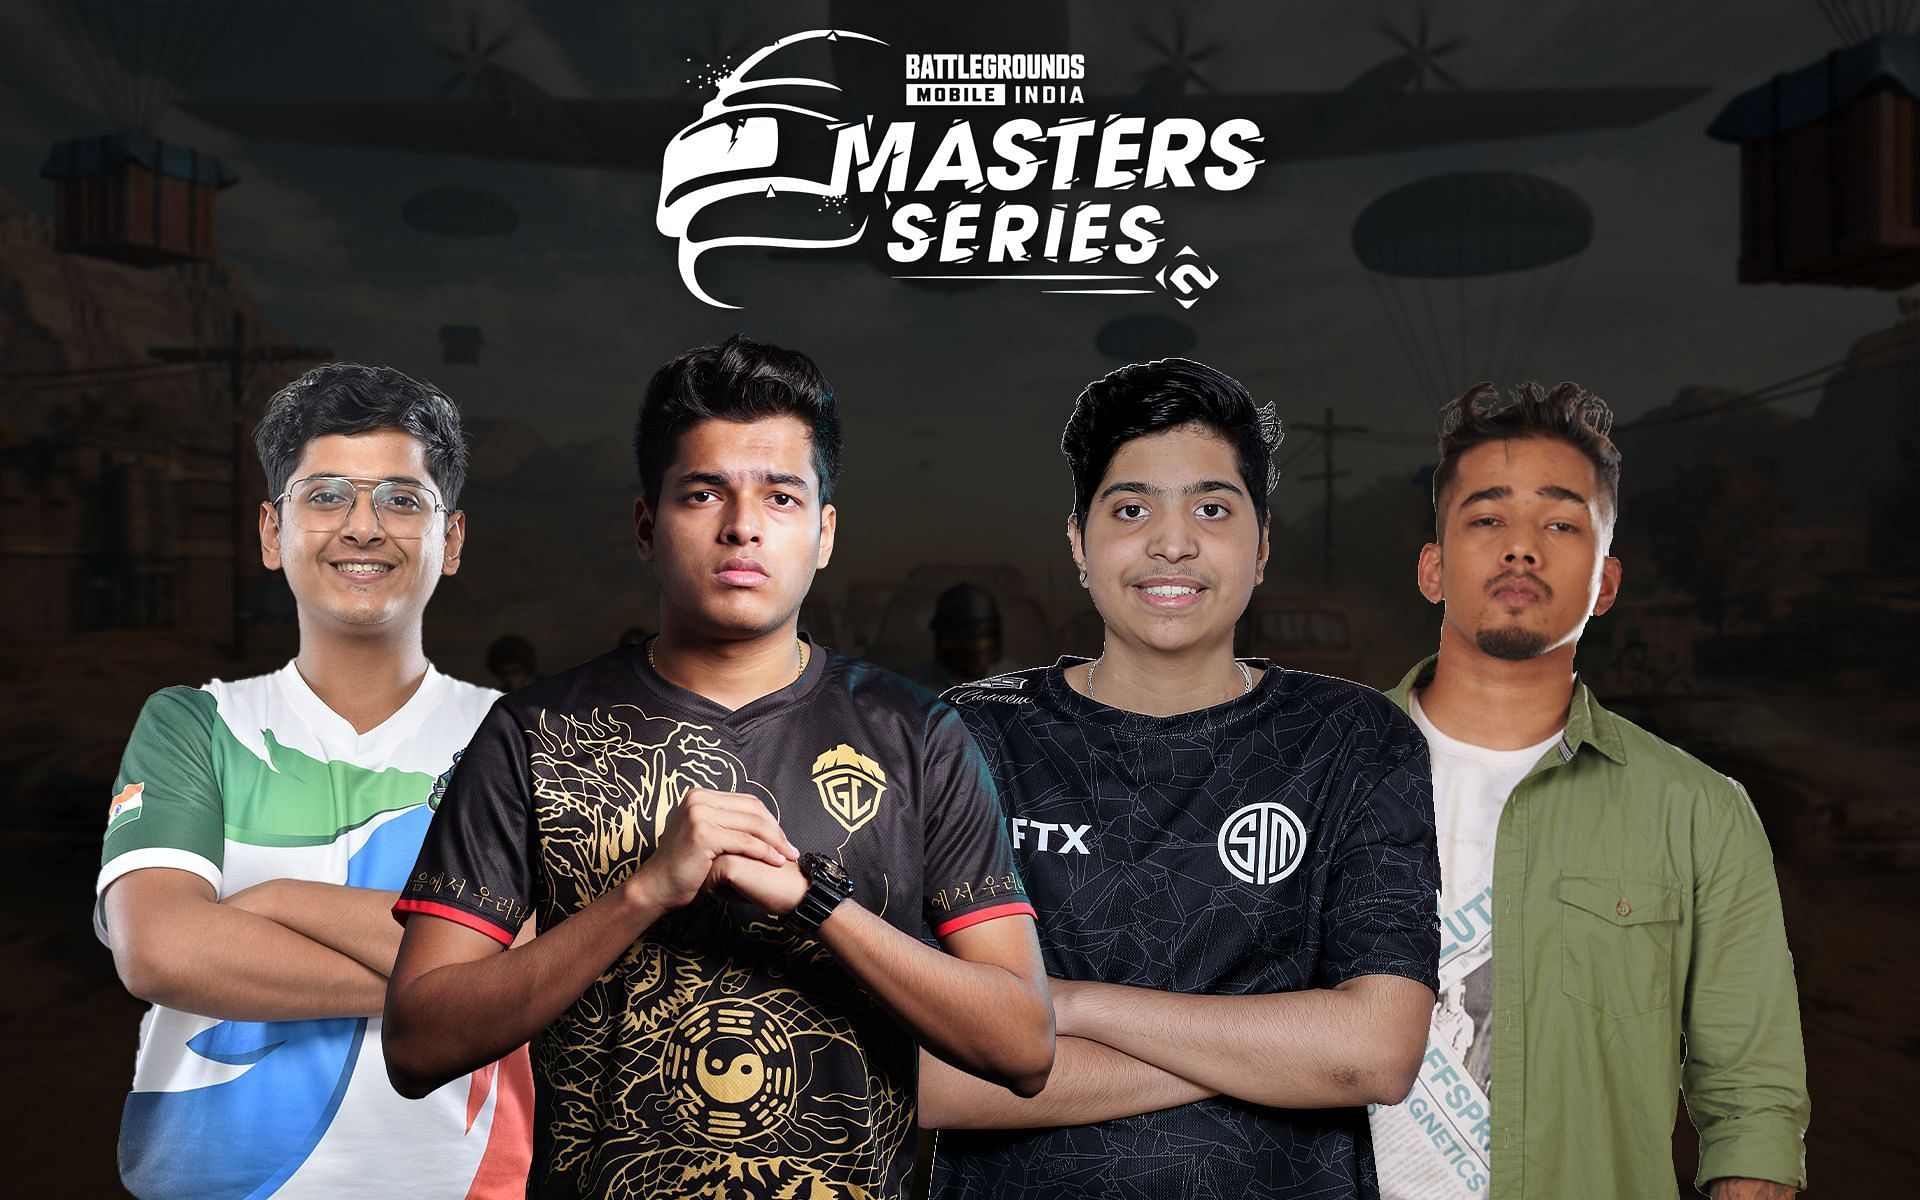 BGMI Masters Series can be watched both on television and mobile phones (Image via Sportskeeda)